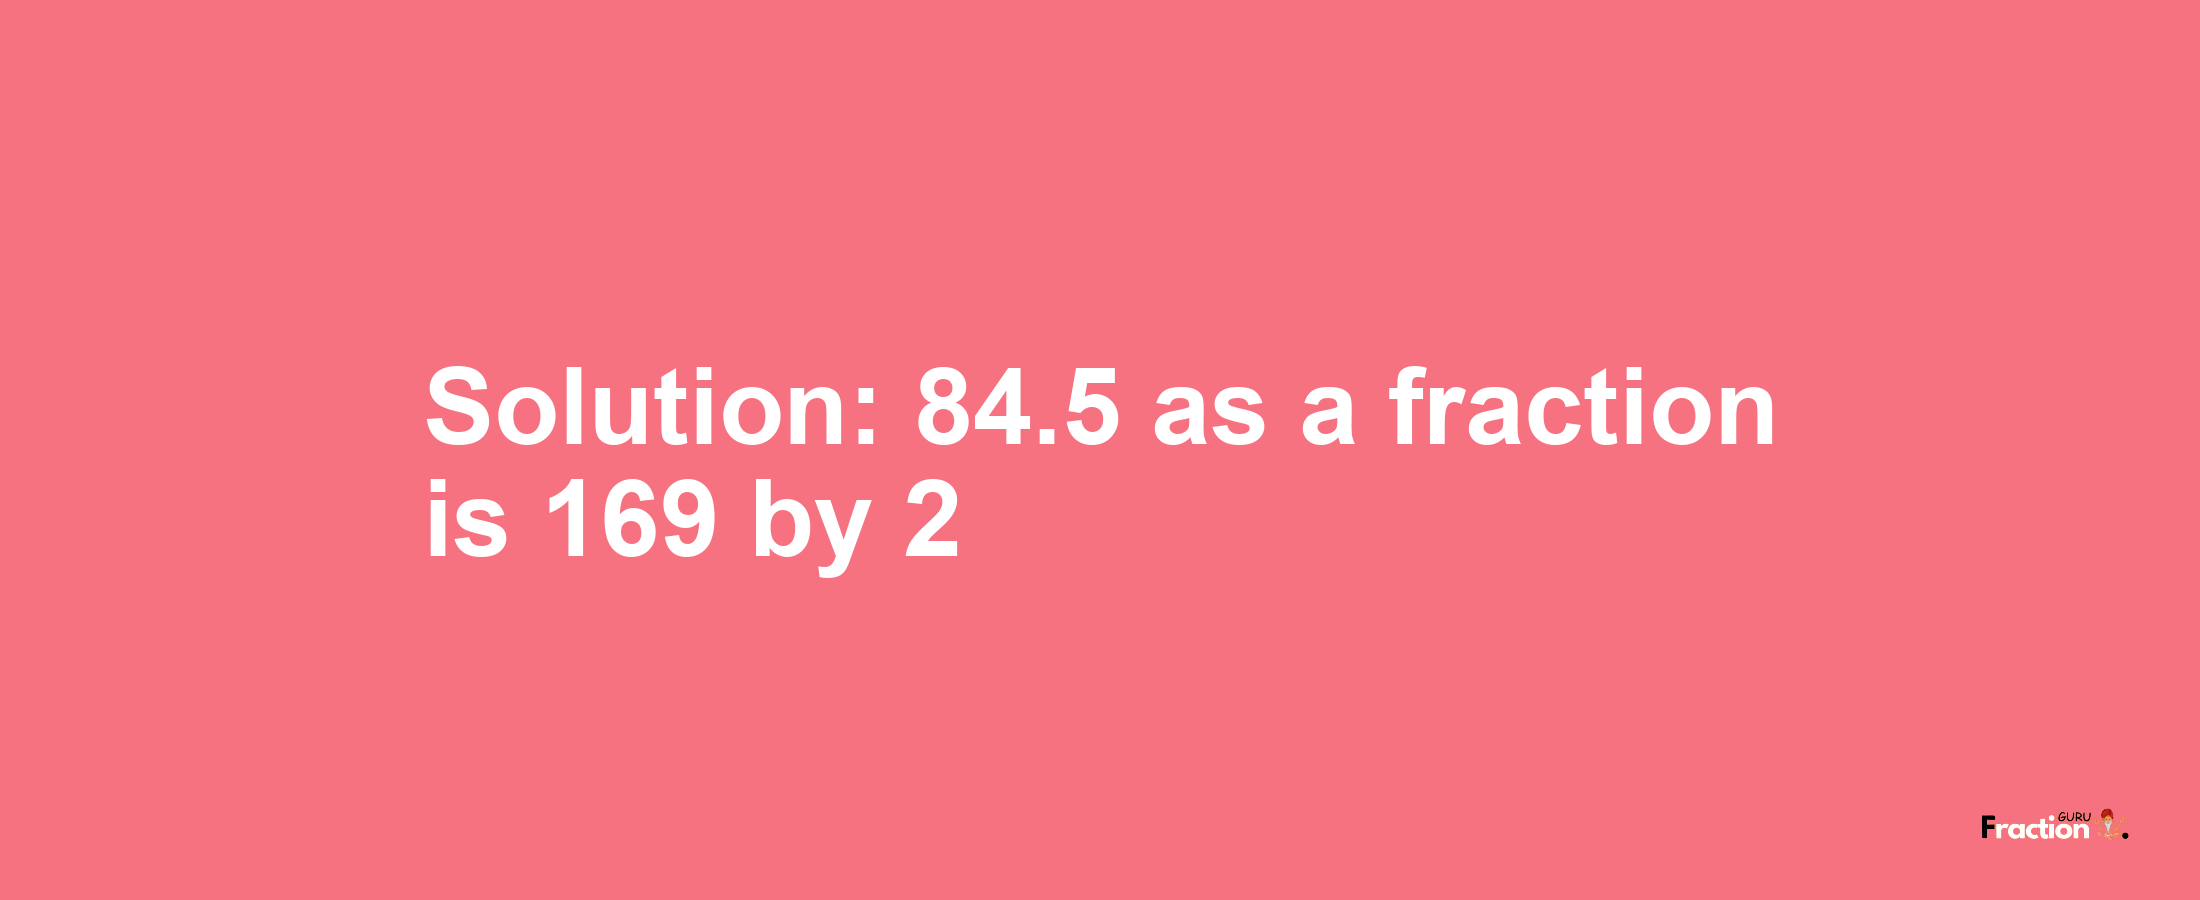 Solution:84.5 as a fraction is 169/2